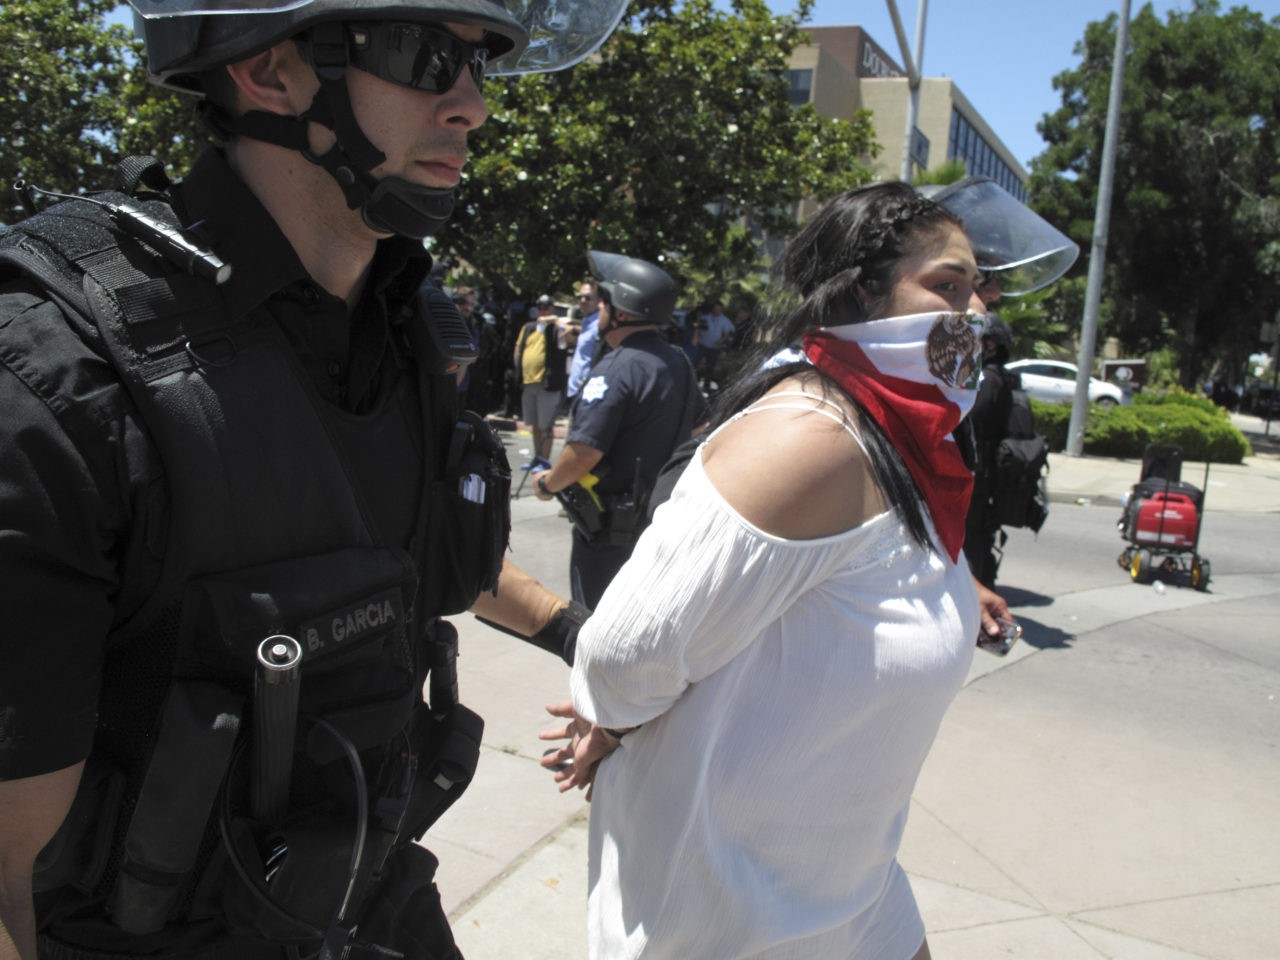 Police officers take a woman into custody after a Republican presidential candidate Donald Trump campaing rally in Fresno, Calif., on Friday, May 27, 2016. Police officers told hundreds of protesters to clear the streets in downtown Fresno following the Trump rally. Officers dressed in riot gear arrested two people on suspicion of unlawfully assembly after they refused orders. (AP Photo/Scott Smith)